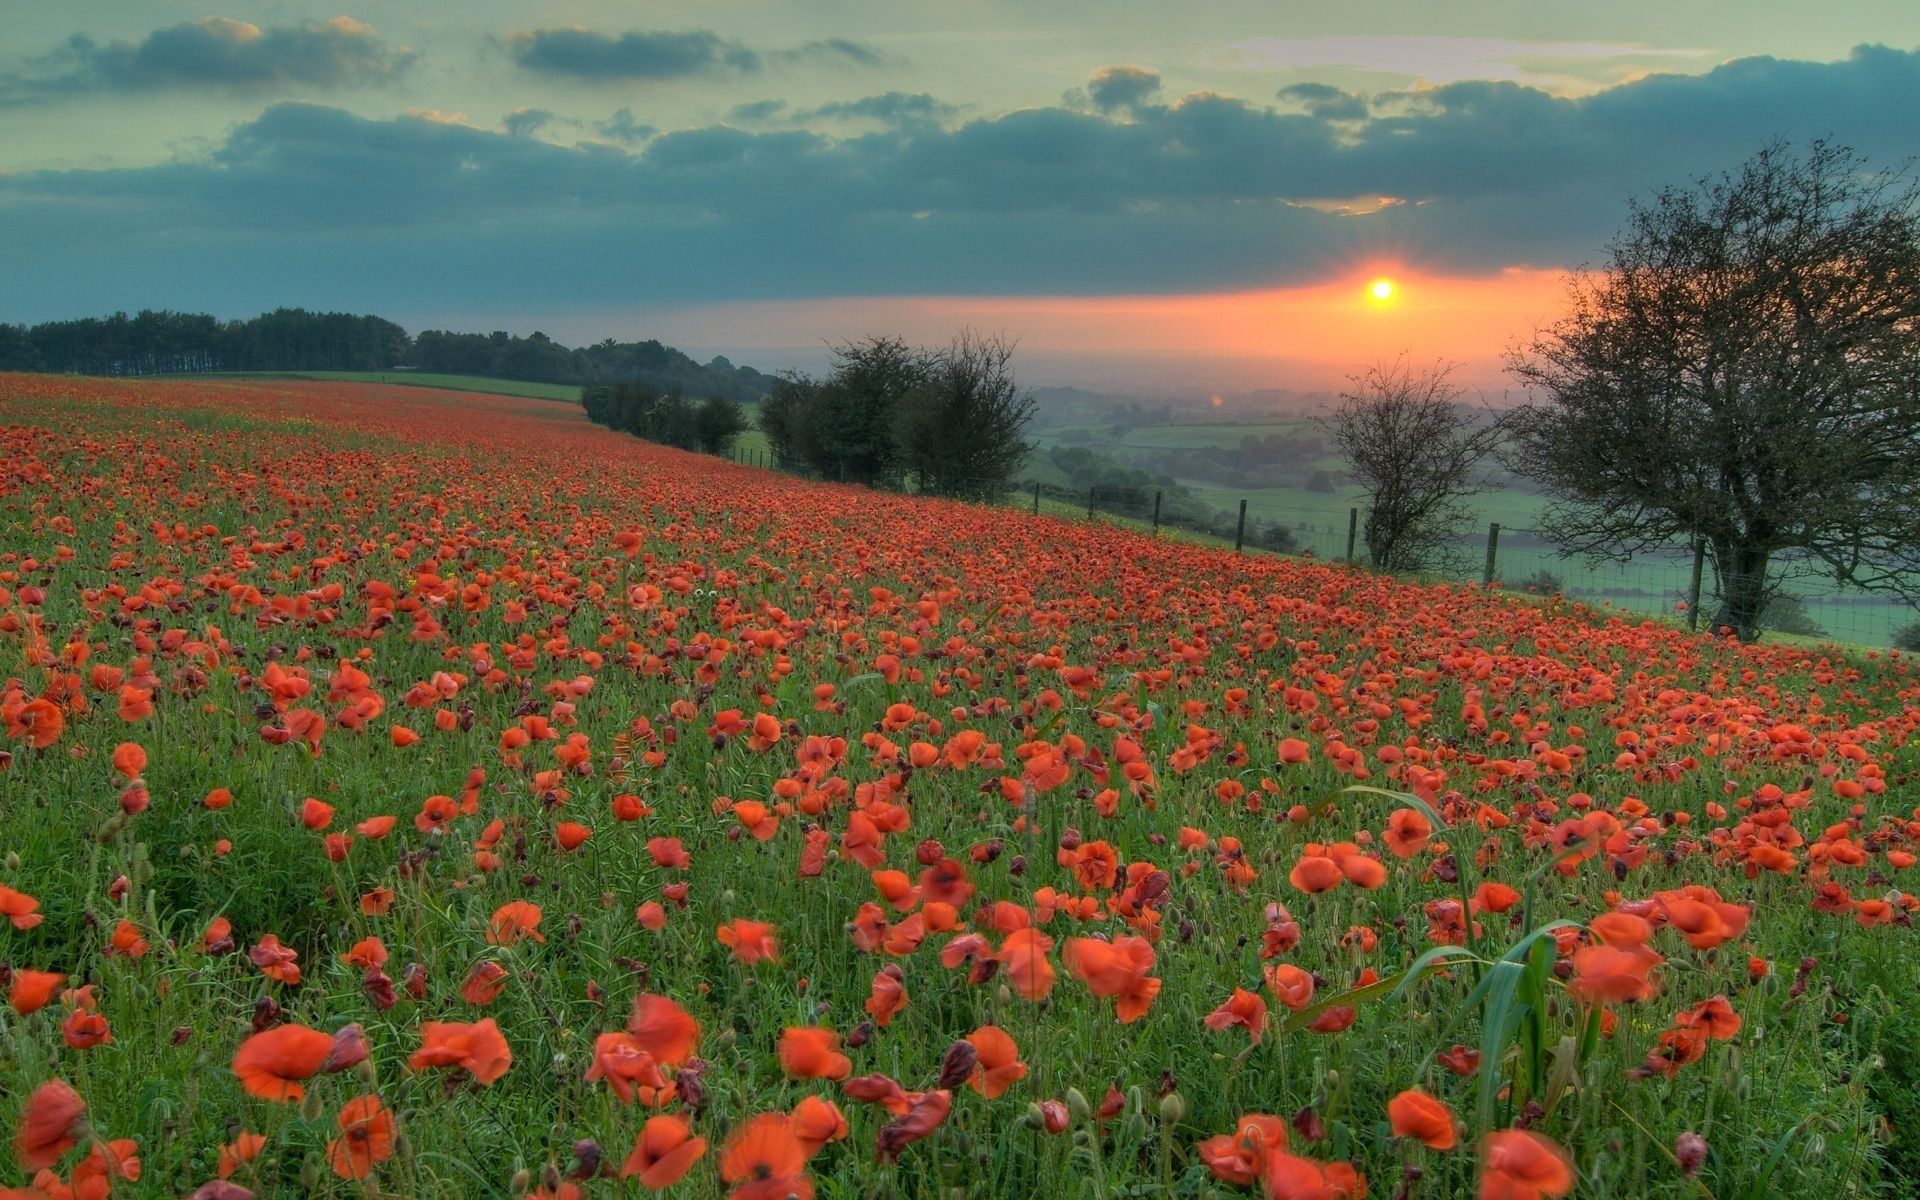 New Lock Screen Wallpapers poppies, nature, flowers, sunset, field, evening